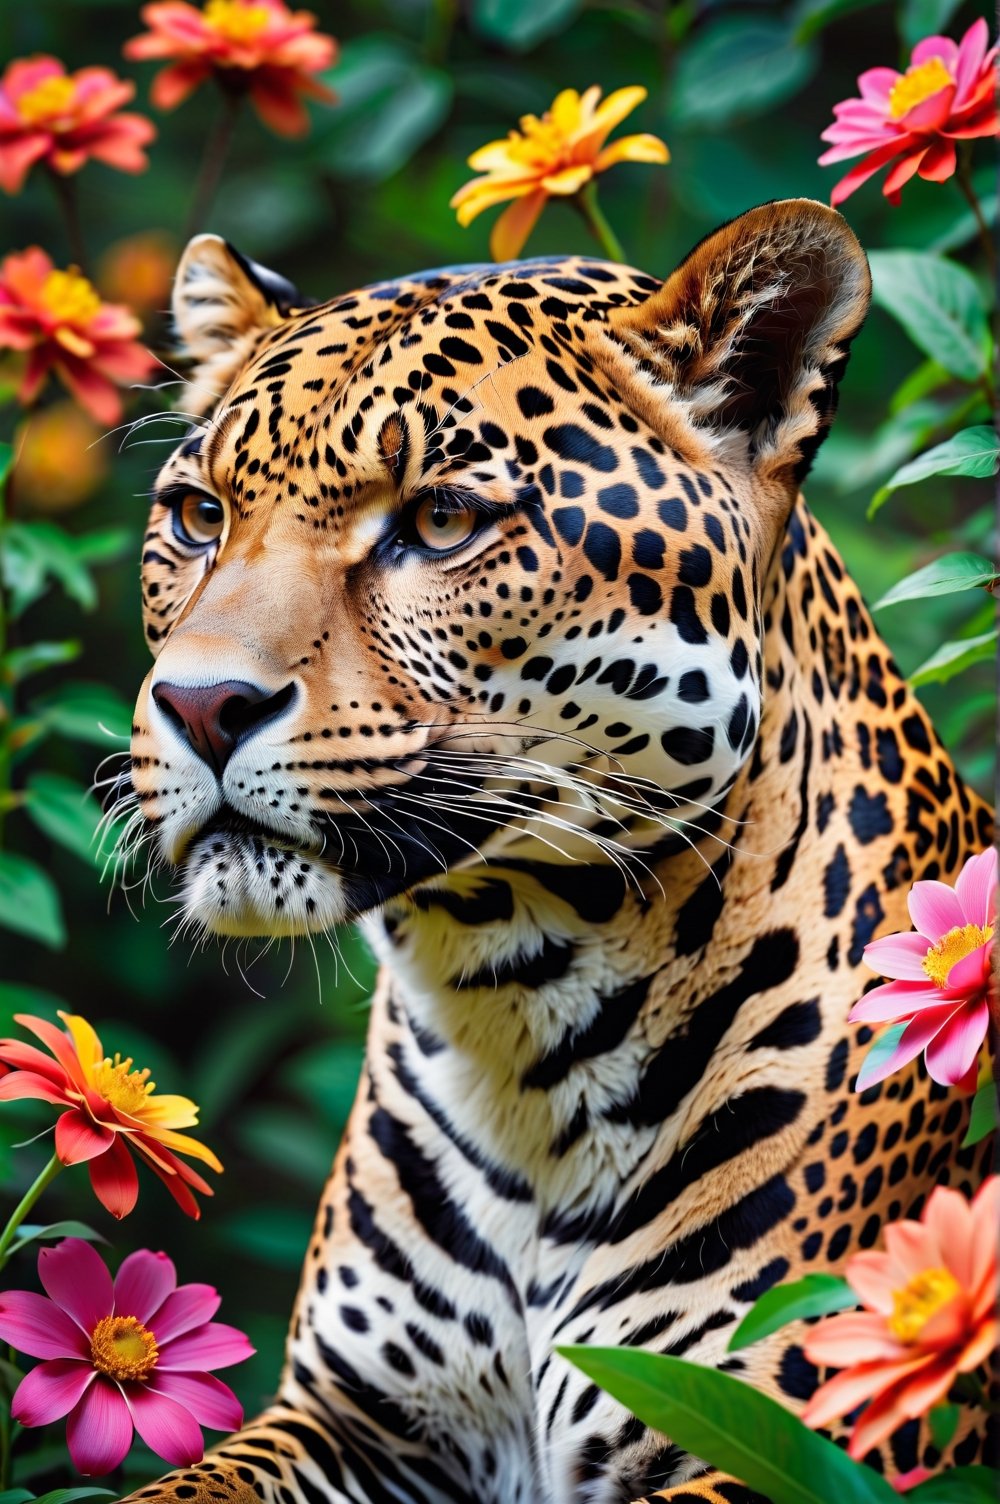 Close-up of a cute jaguar in graceful pose in three-quarter view,  colorful flowers around. Extremely realistic. A memorable photo.,Flora